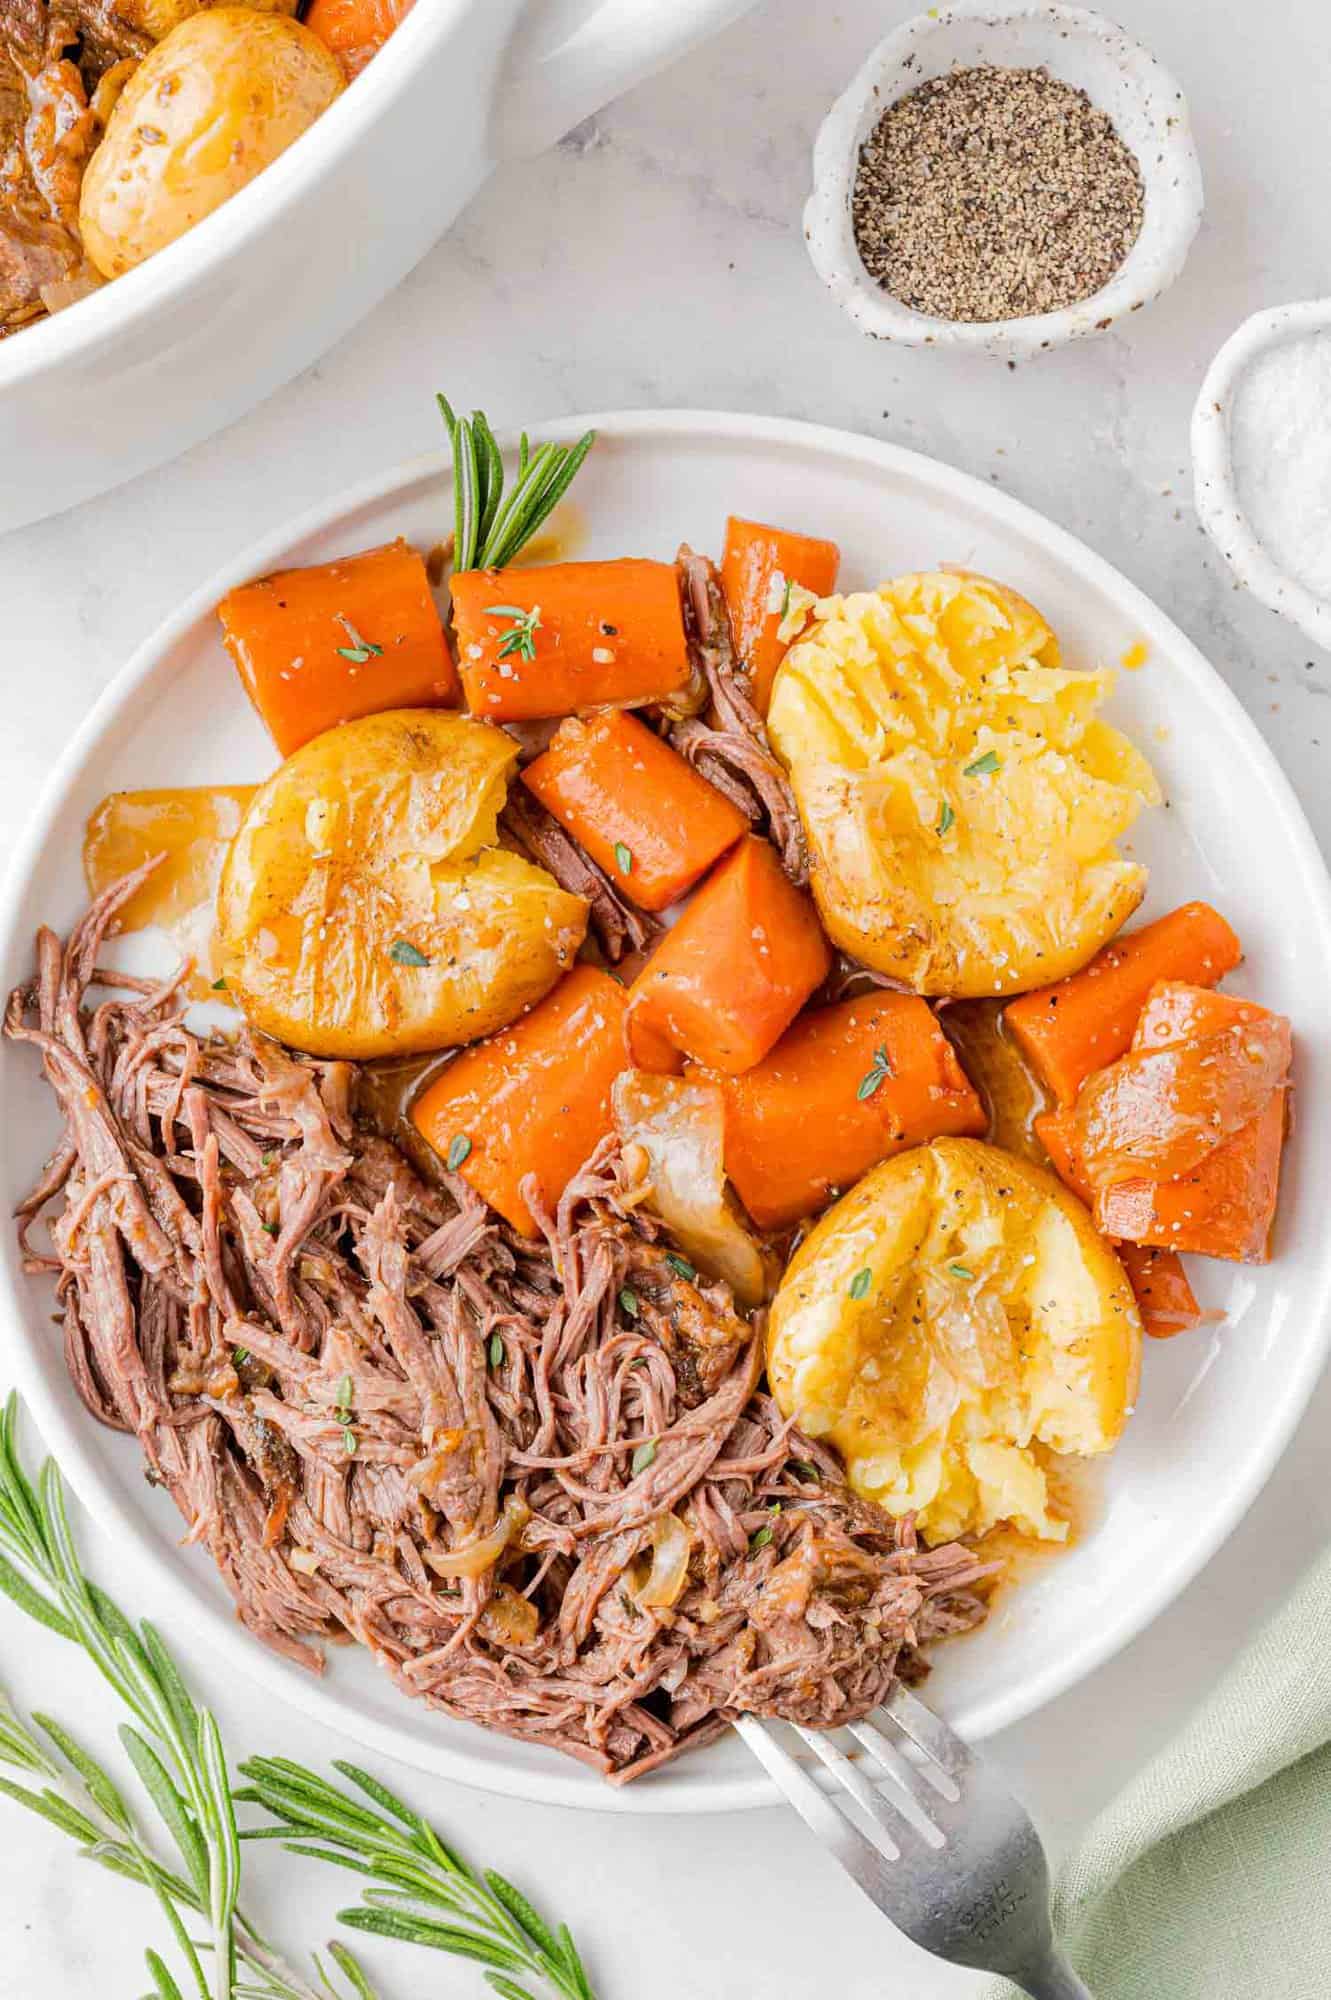 Plated pot roast with potatoes and carrots.